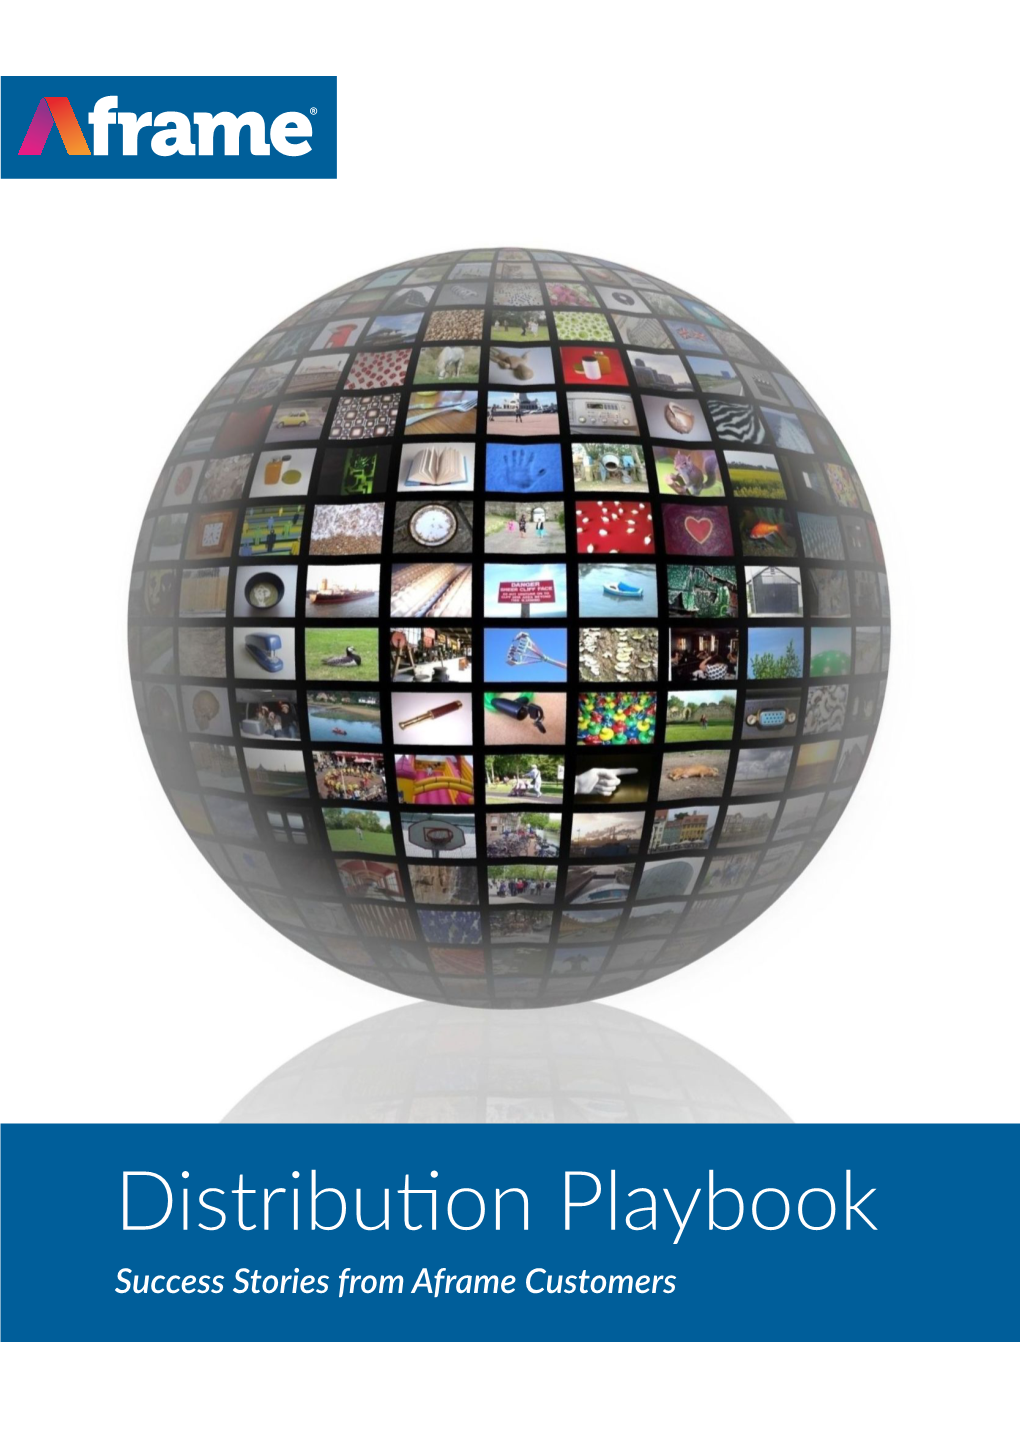 Distribution Playbook Success Stories from Aframe Customers